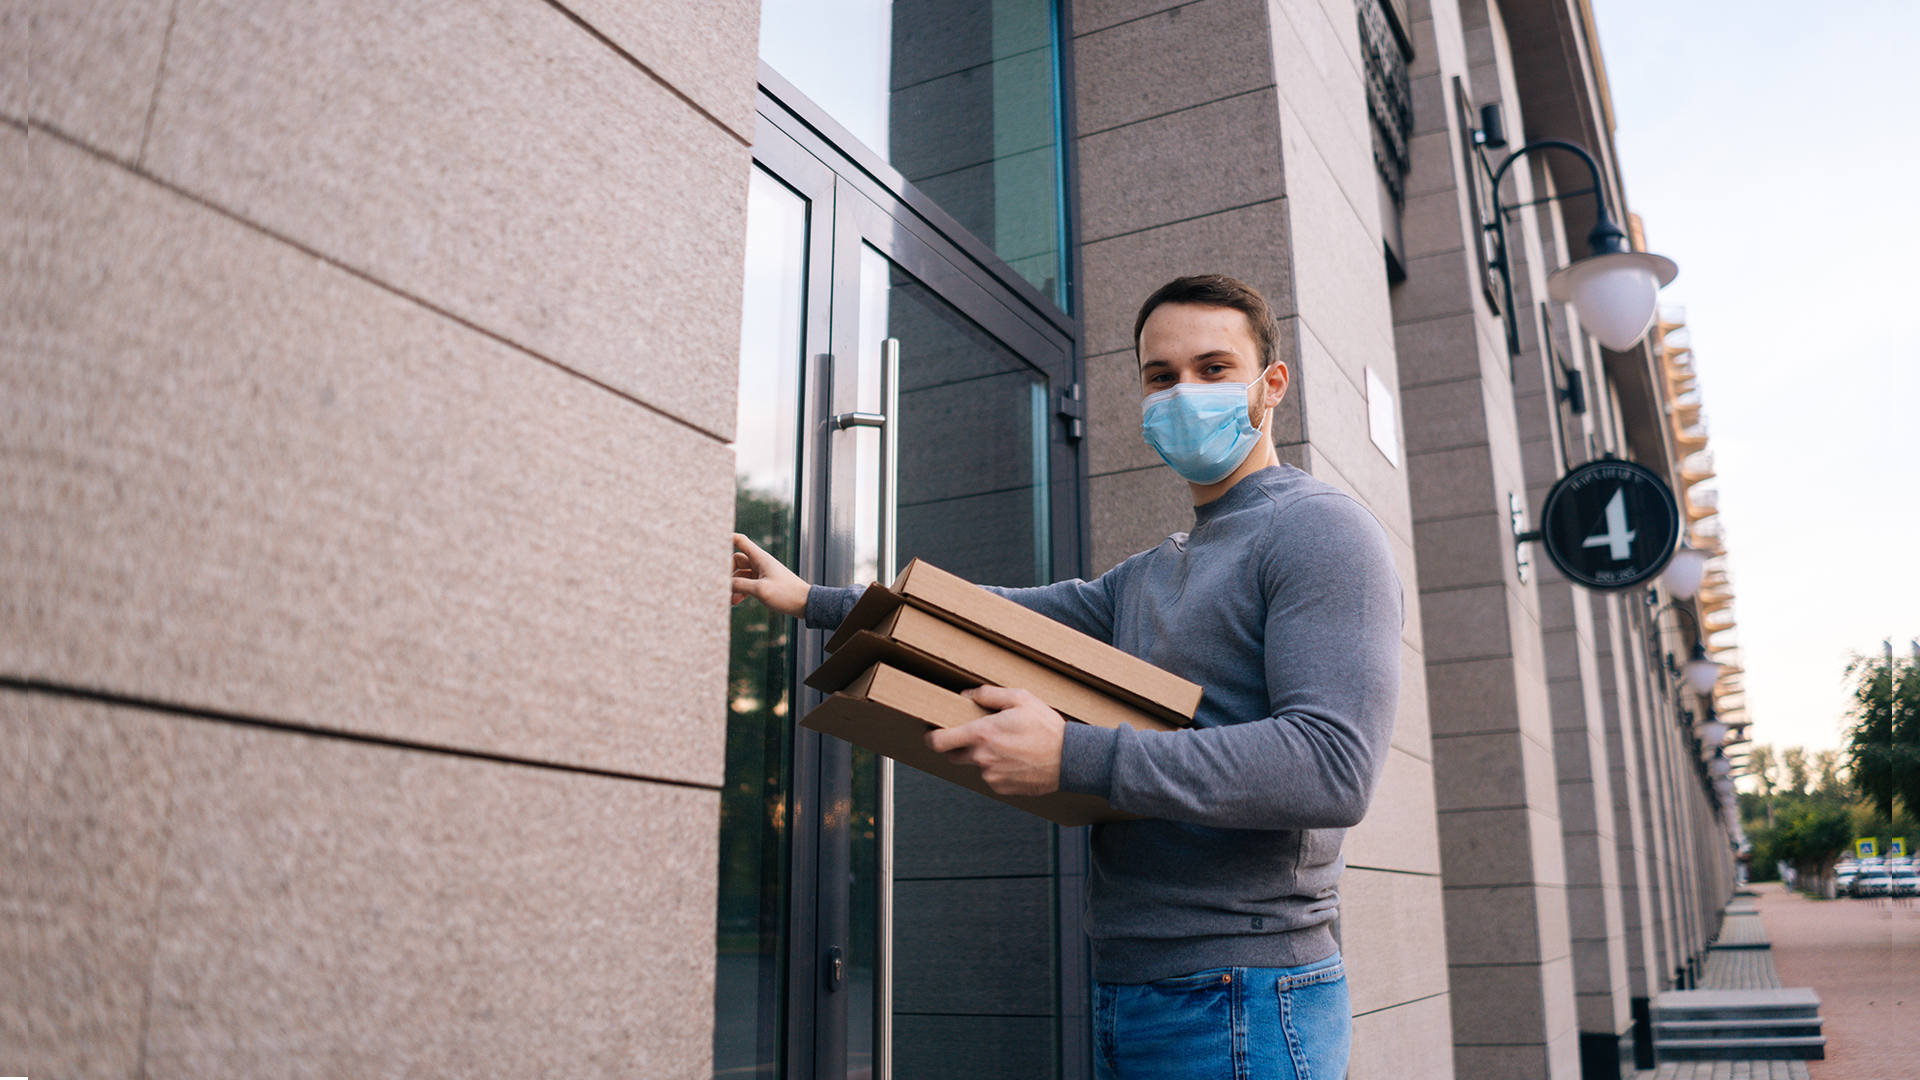 feature-delivery-man-wearing-medical-mask-ringing-door-delivery-carton-boxes-with-hot-pizza-copy.jpg